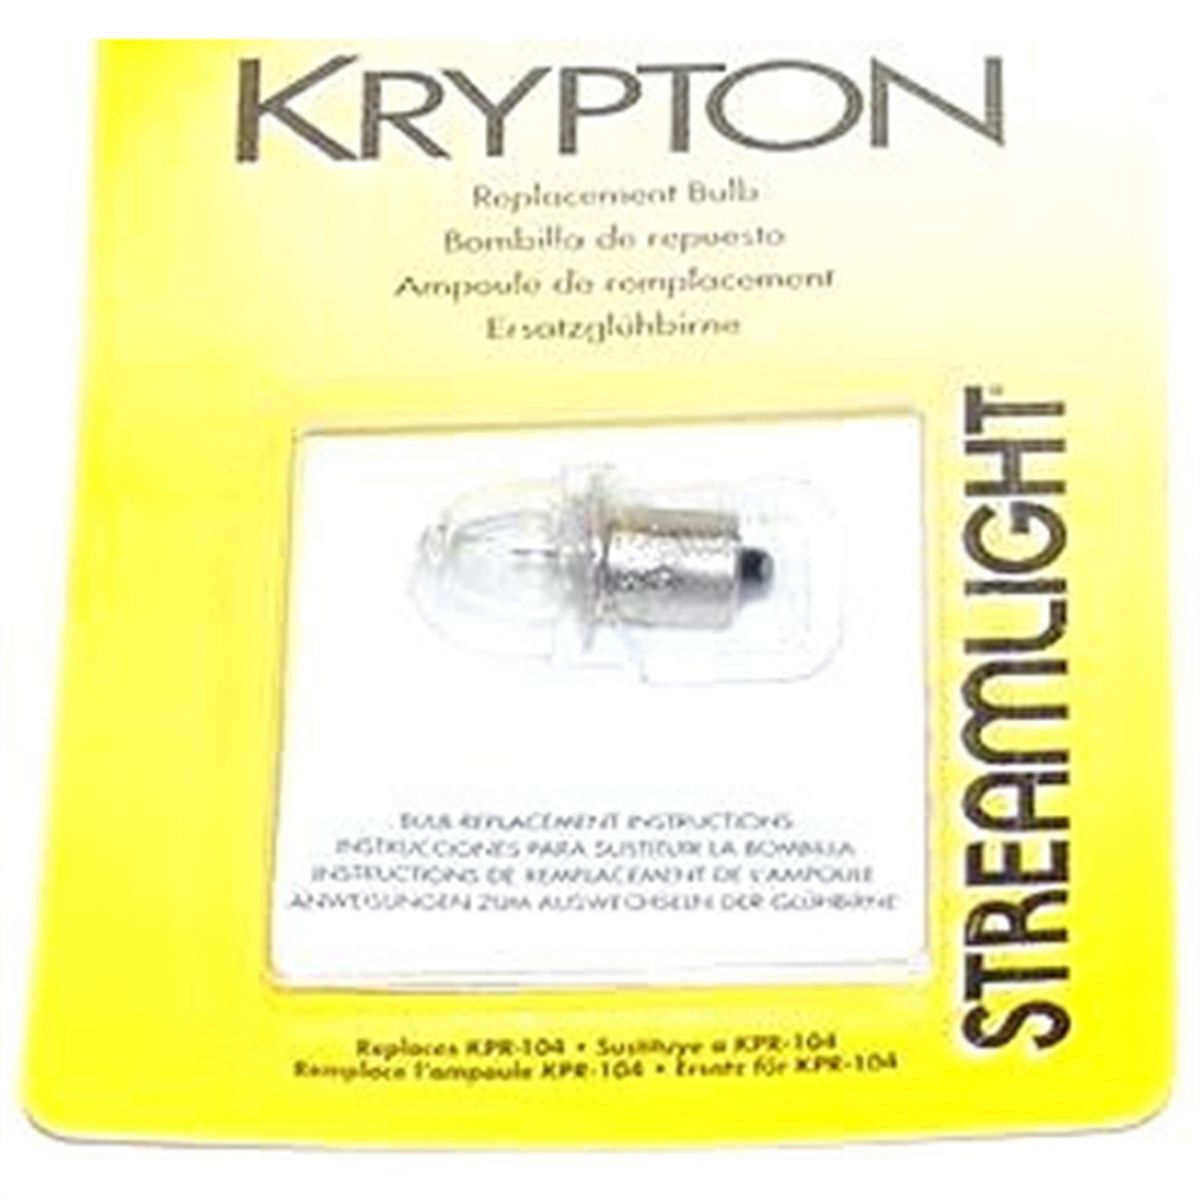 Krypton Replacement Bulb for TopSpotr 2